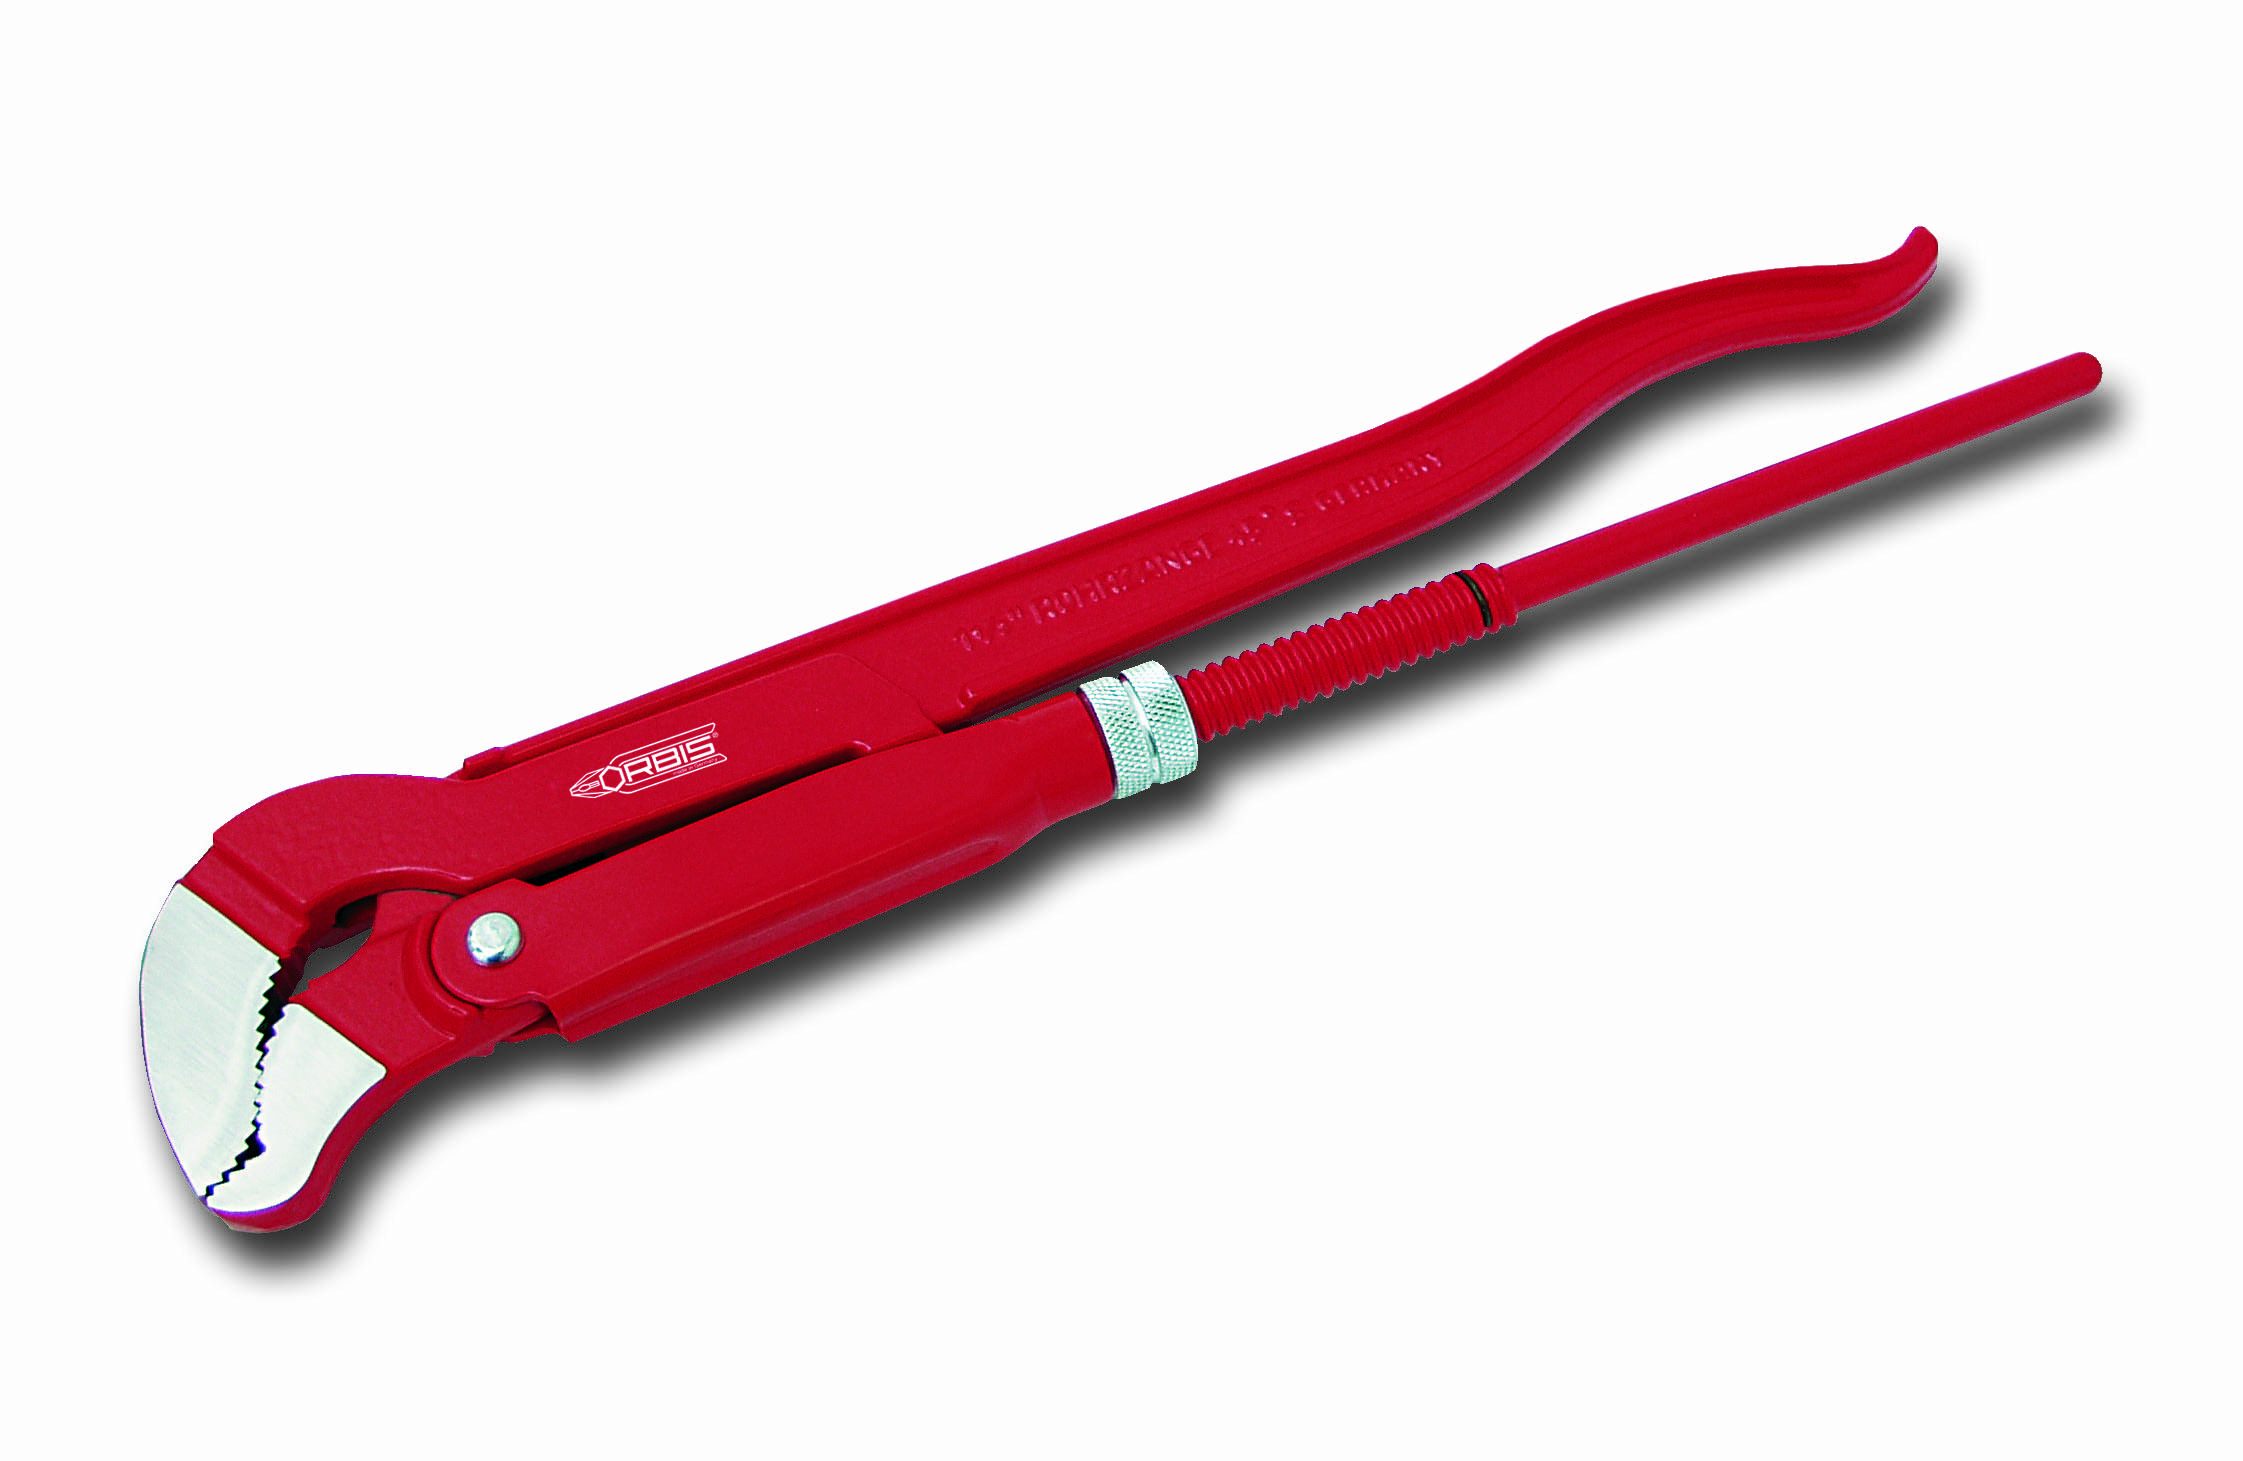 Pipe wrench S-type335 mm